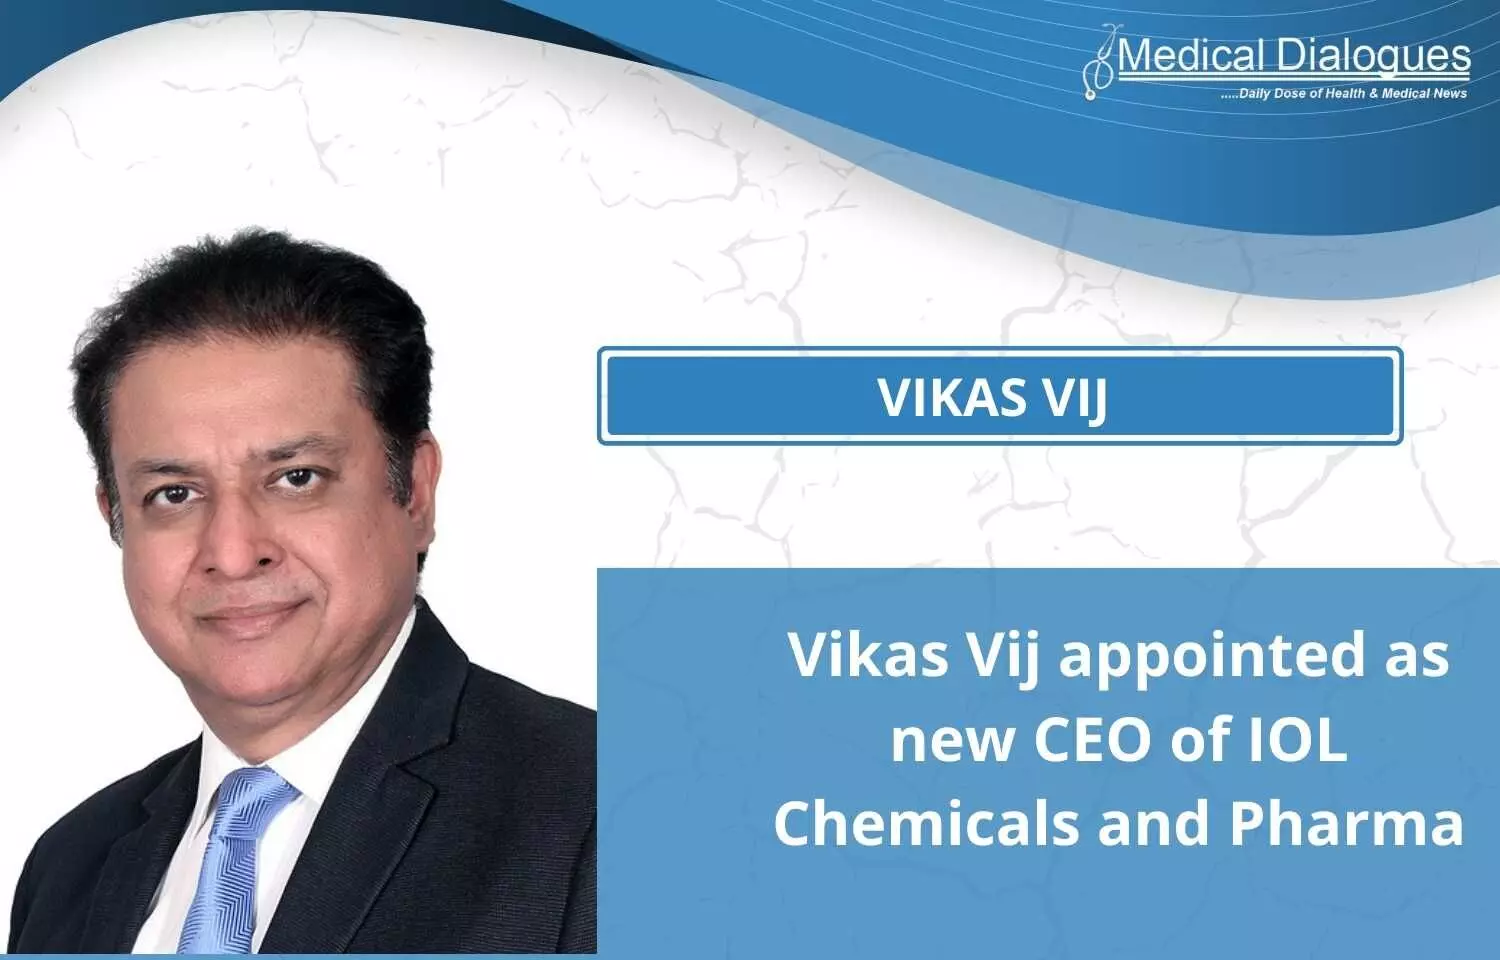 Vikas Vij appointed as new CEO of IOL Chemicals and Pharma